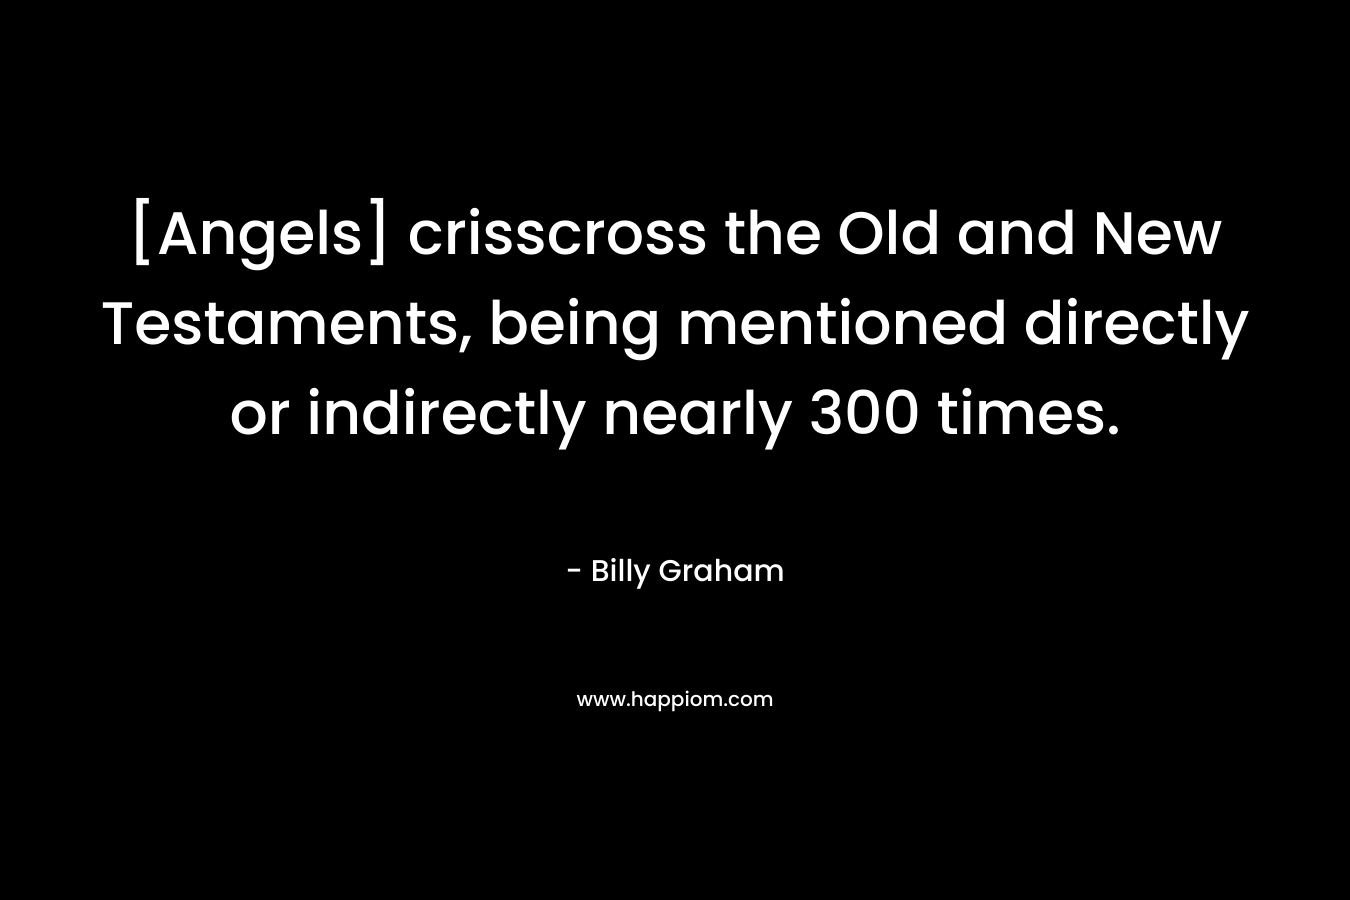 [Angels] crisscross the Old and New Testaments, being mentioned directly or indirectly nearly 300 times.